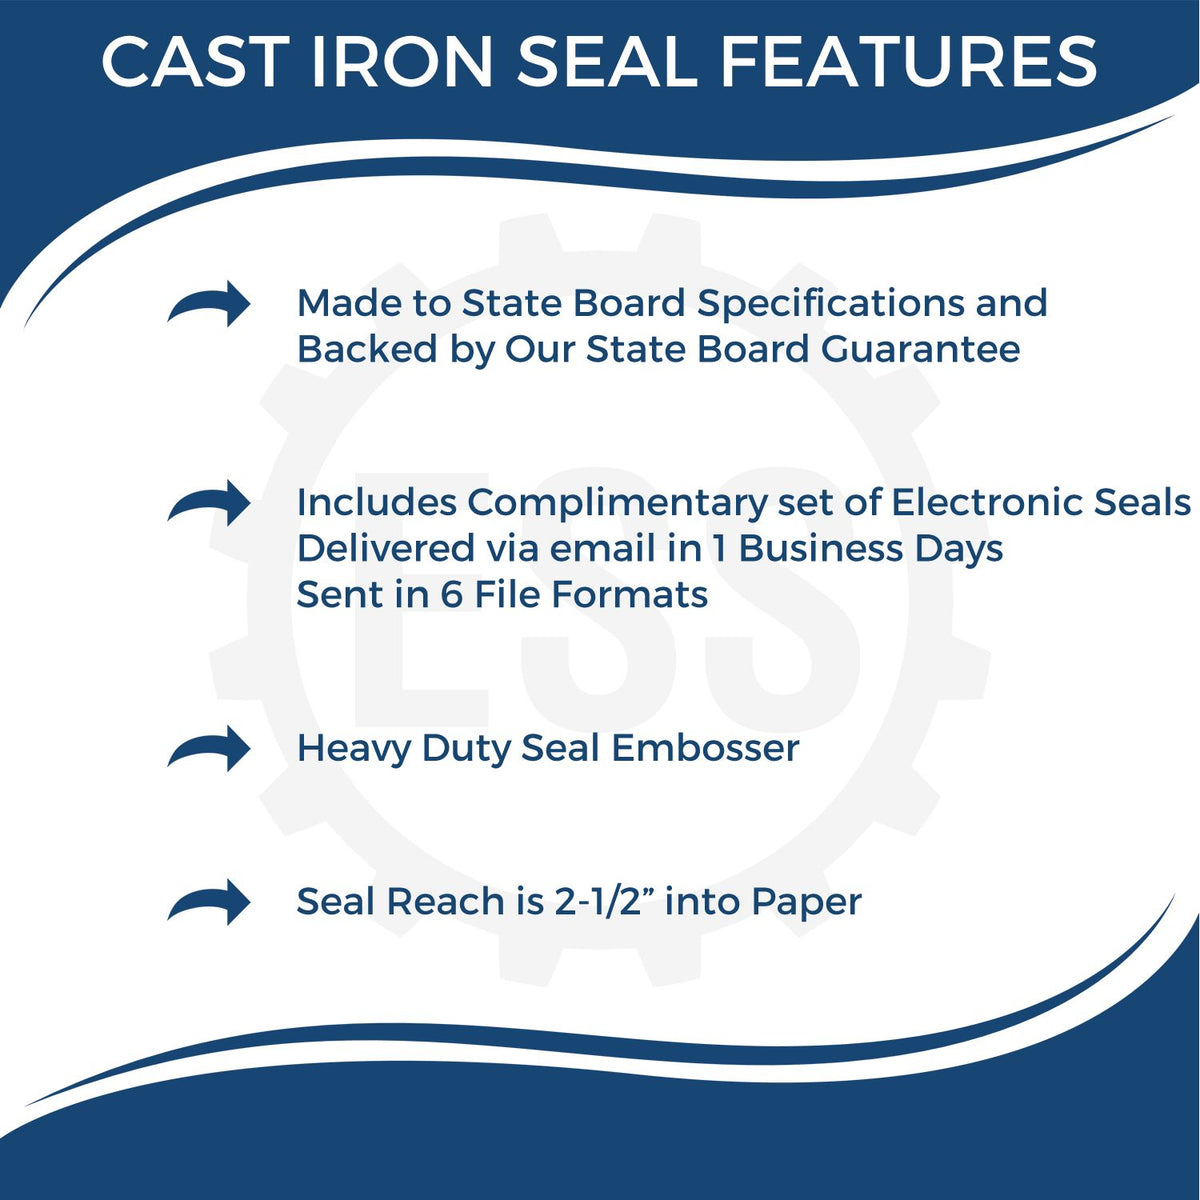 A picture of an infographic highlighting the selling points for the Heavy Duty Cast Iron Nebraska Land Surveyor Seal Embosser